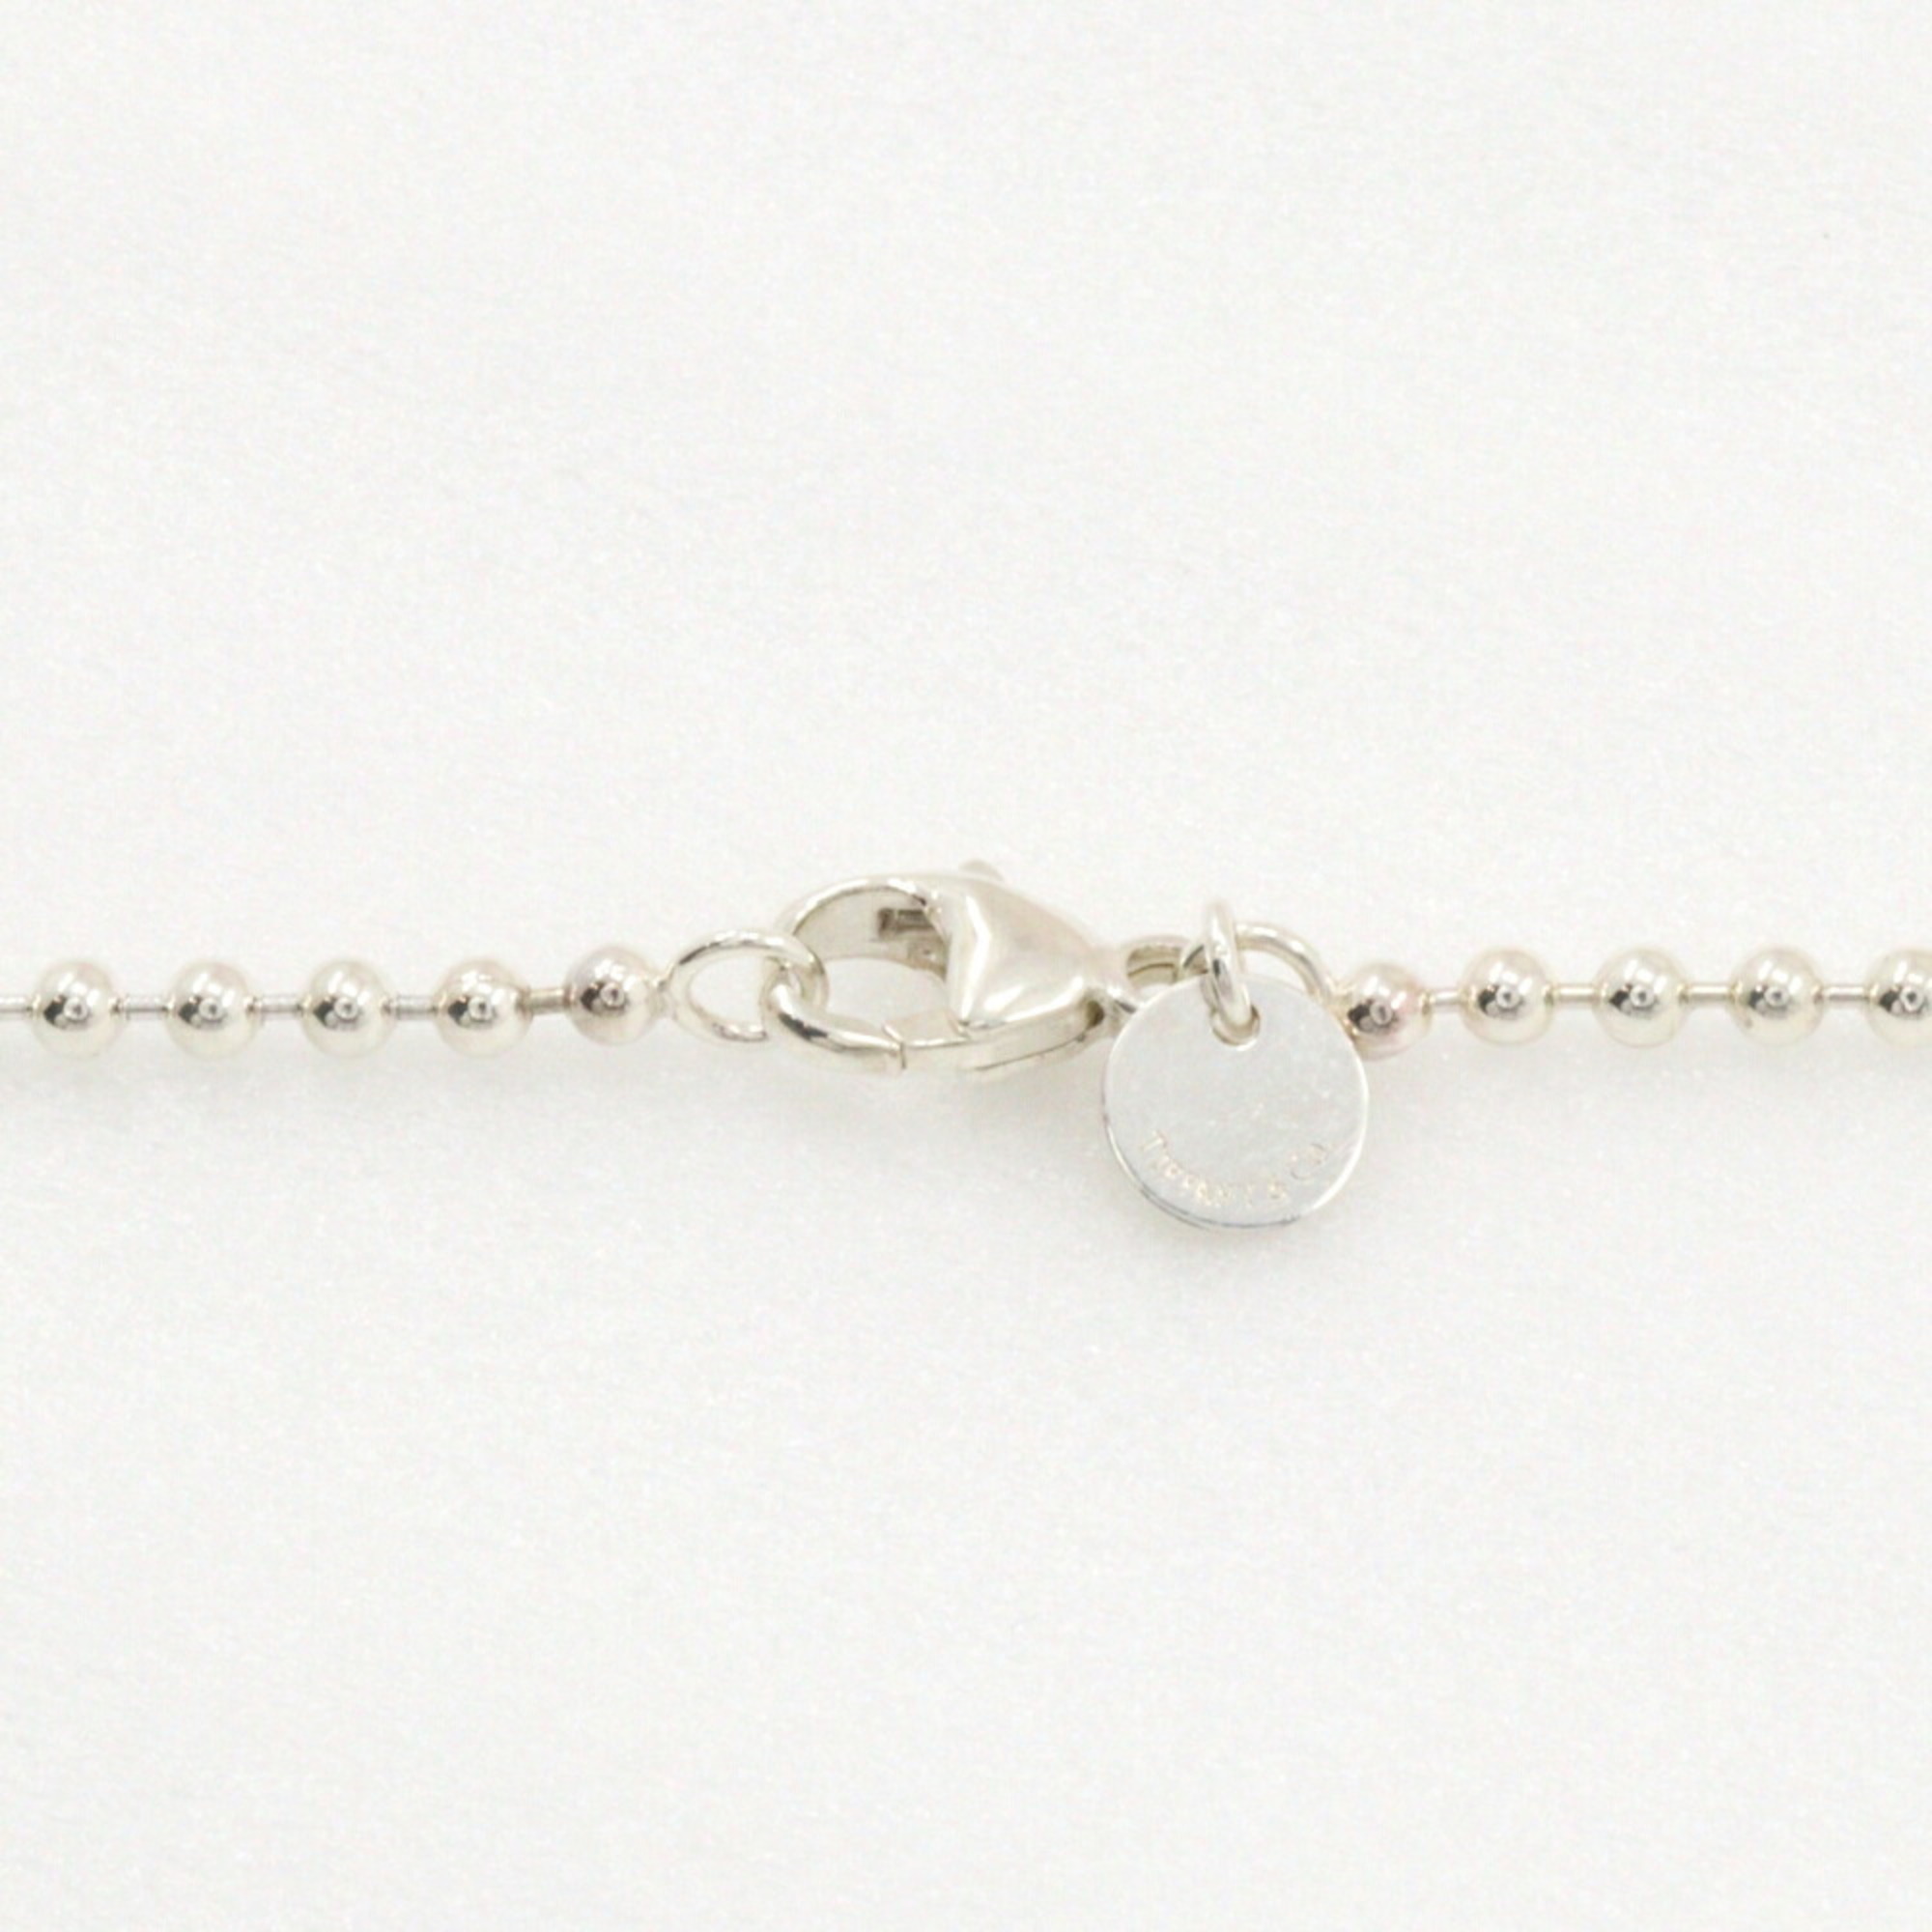 Tiffany & Co. Return to Necklace Heart Tag Ball Chain Silver 925 Made in USA M10113 Approx. 22.5g TIFFANY Women's